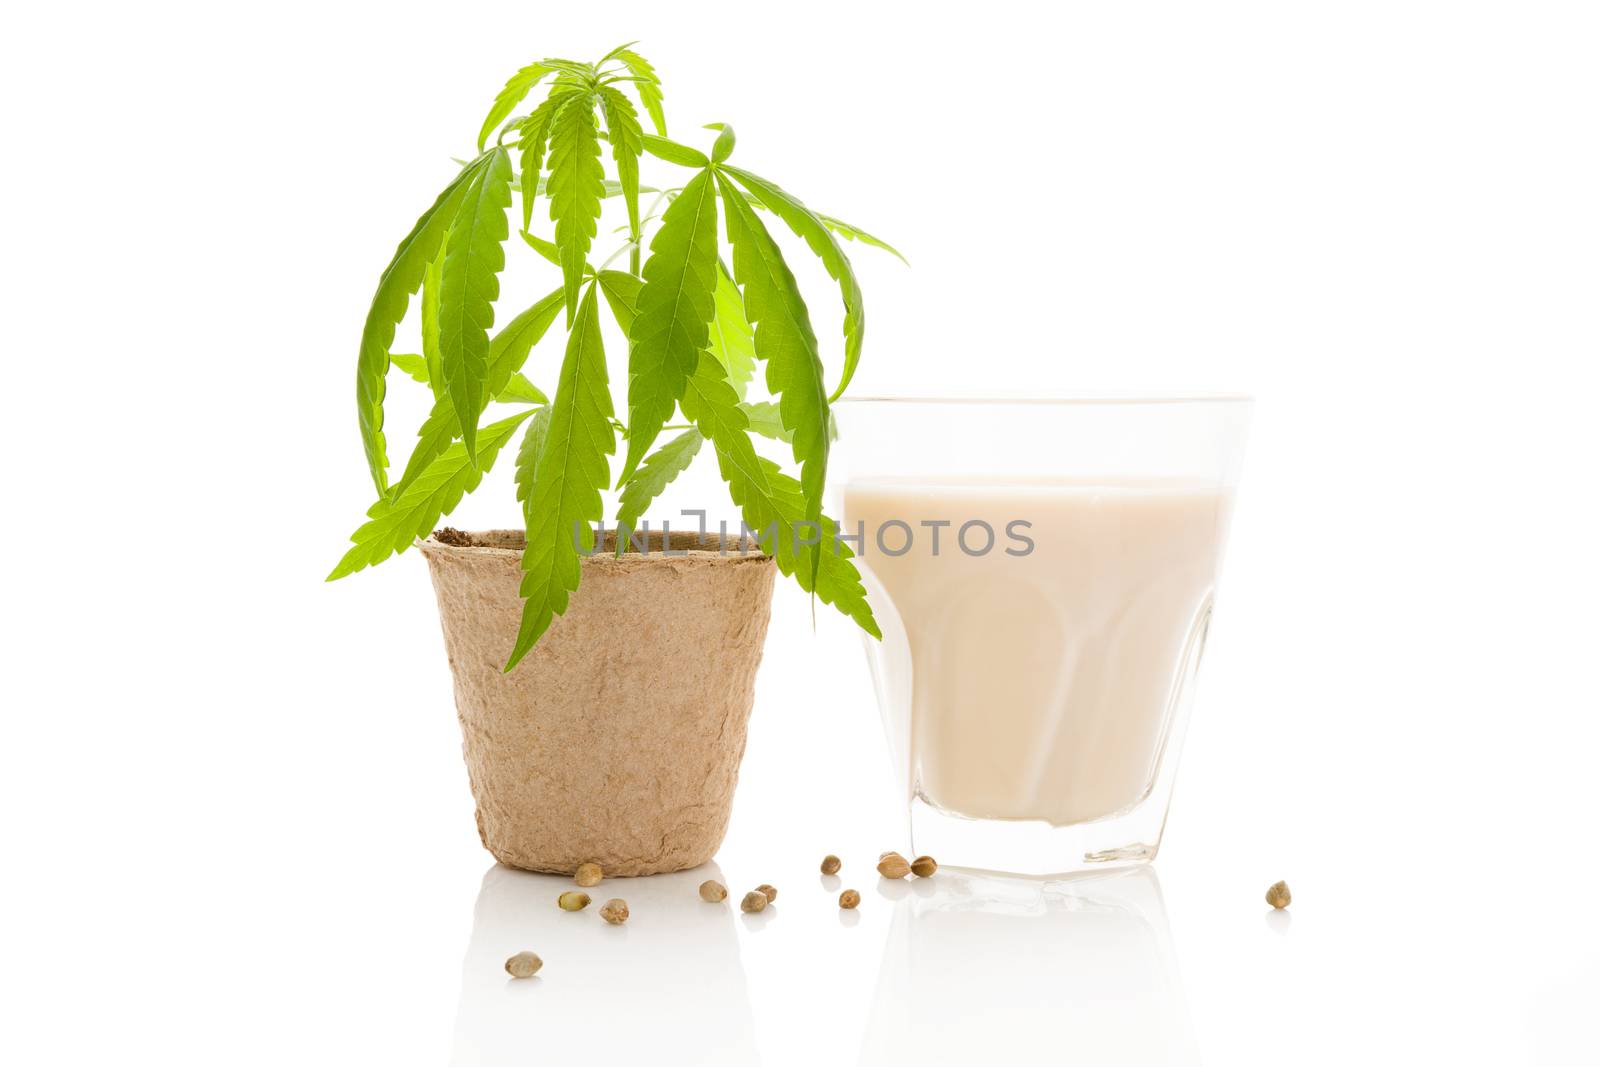 Non dairy milk, vegan eating. Hemp milk. Cannabis plant in pot and a glass of milk isolated on white background. 